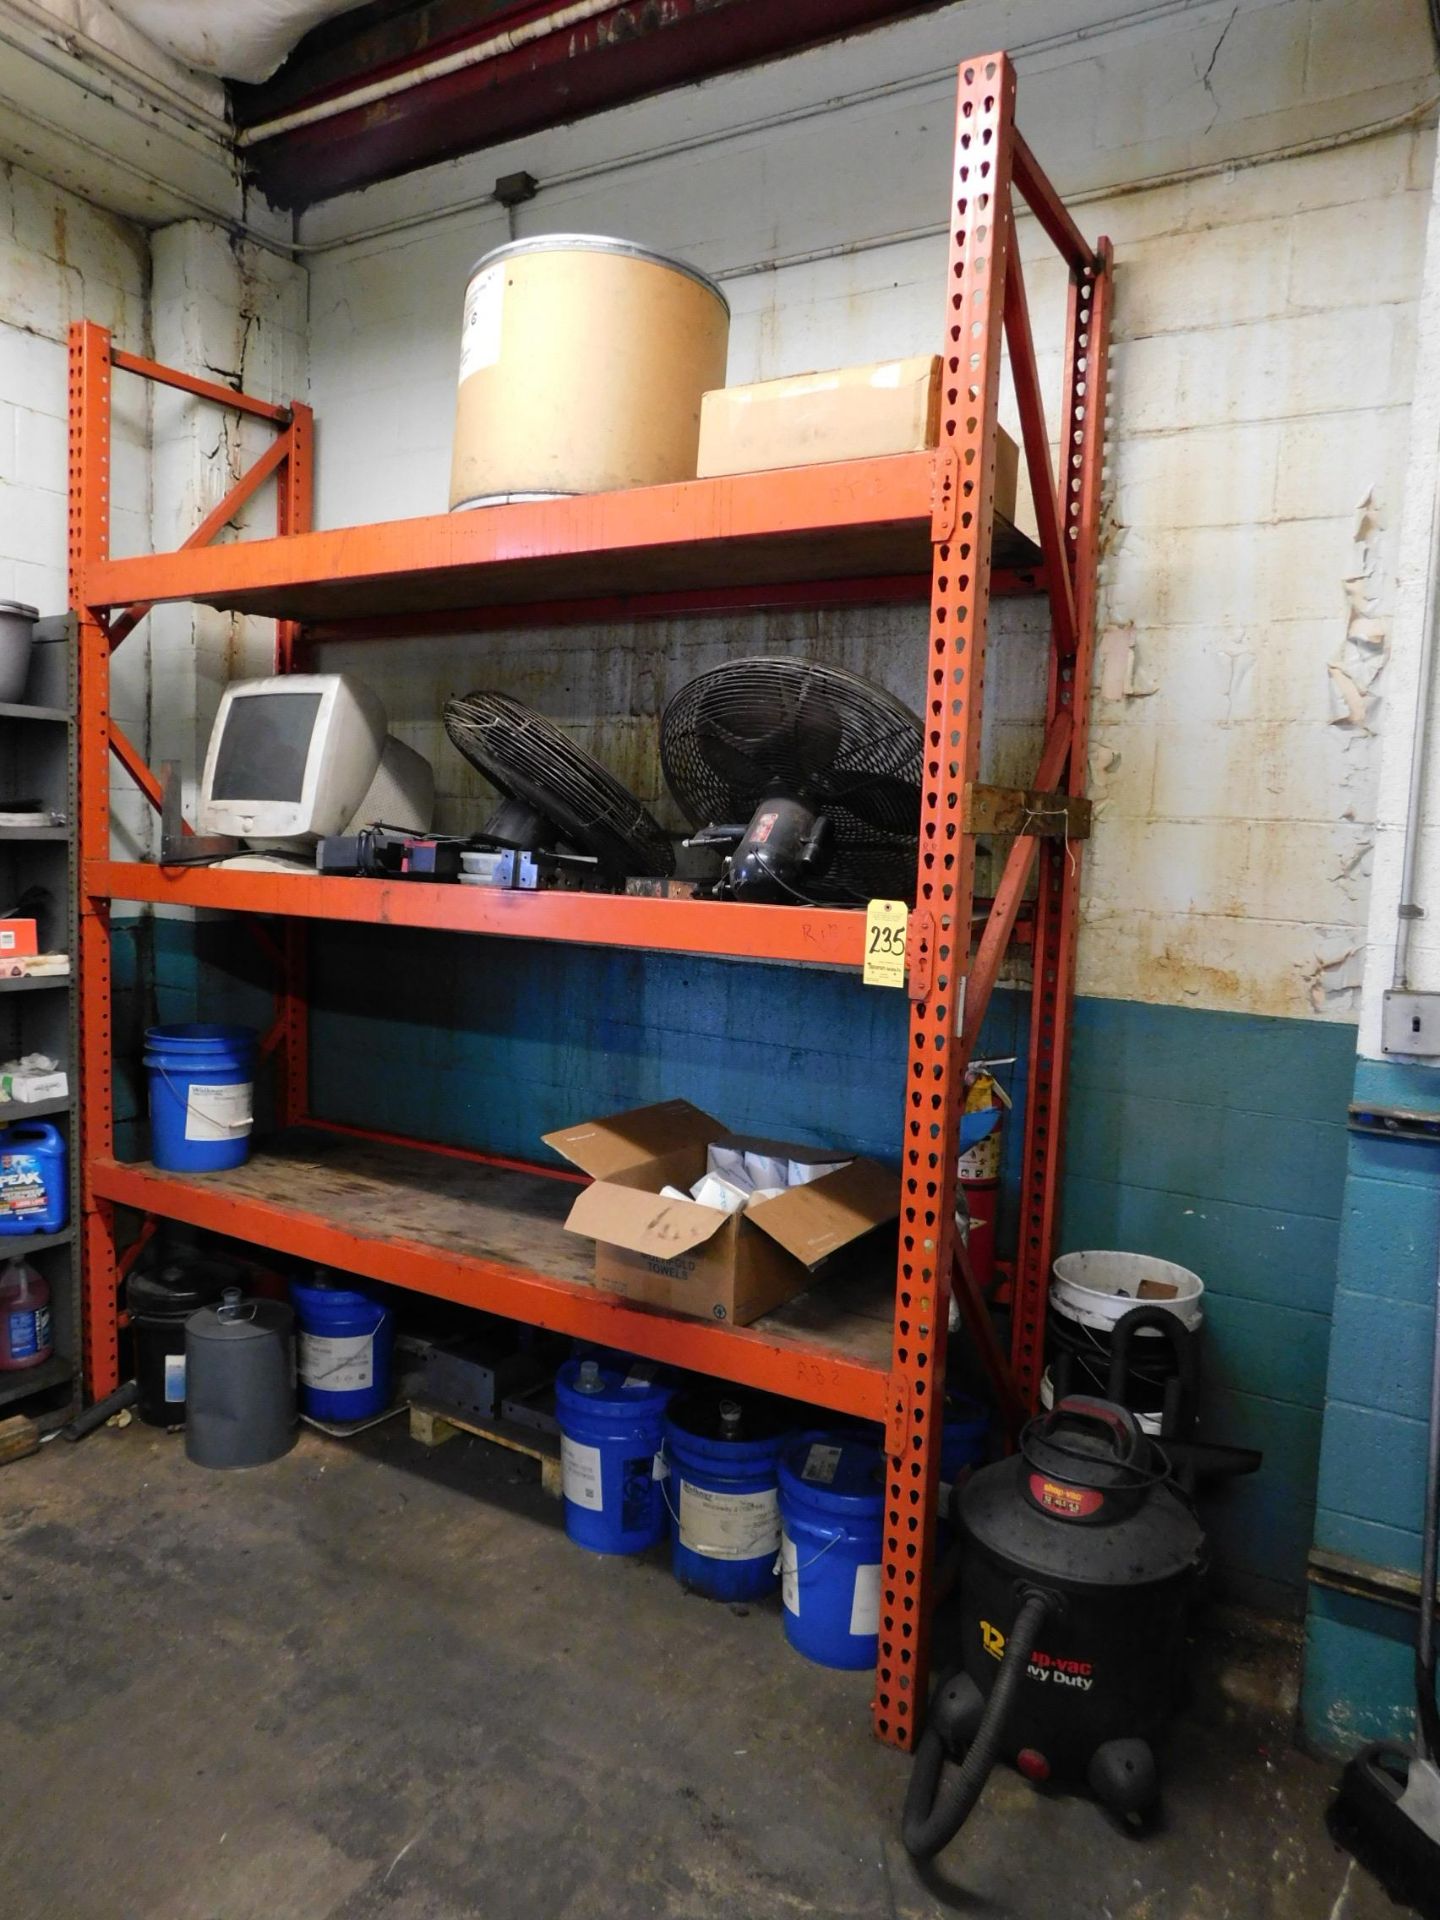 Pallet Shelving and Contents, 9'6" Tall, 8' Wide, 30" Deep